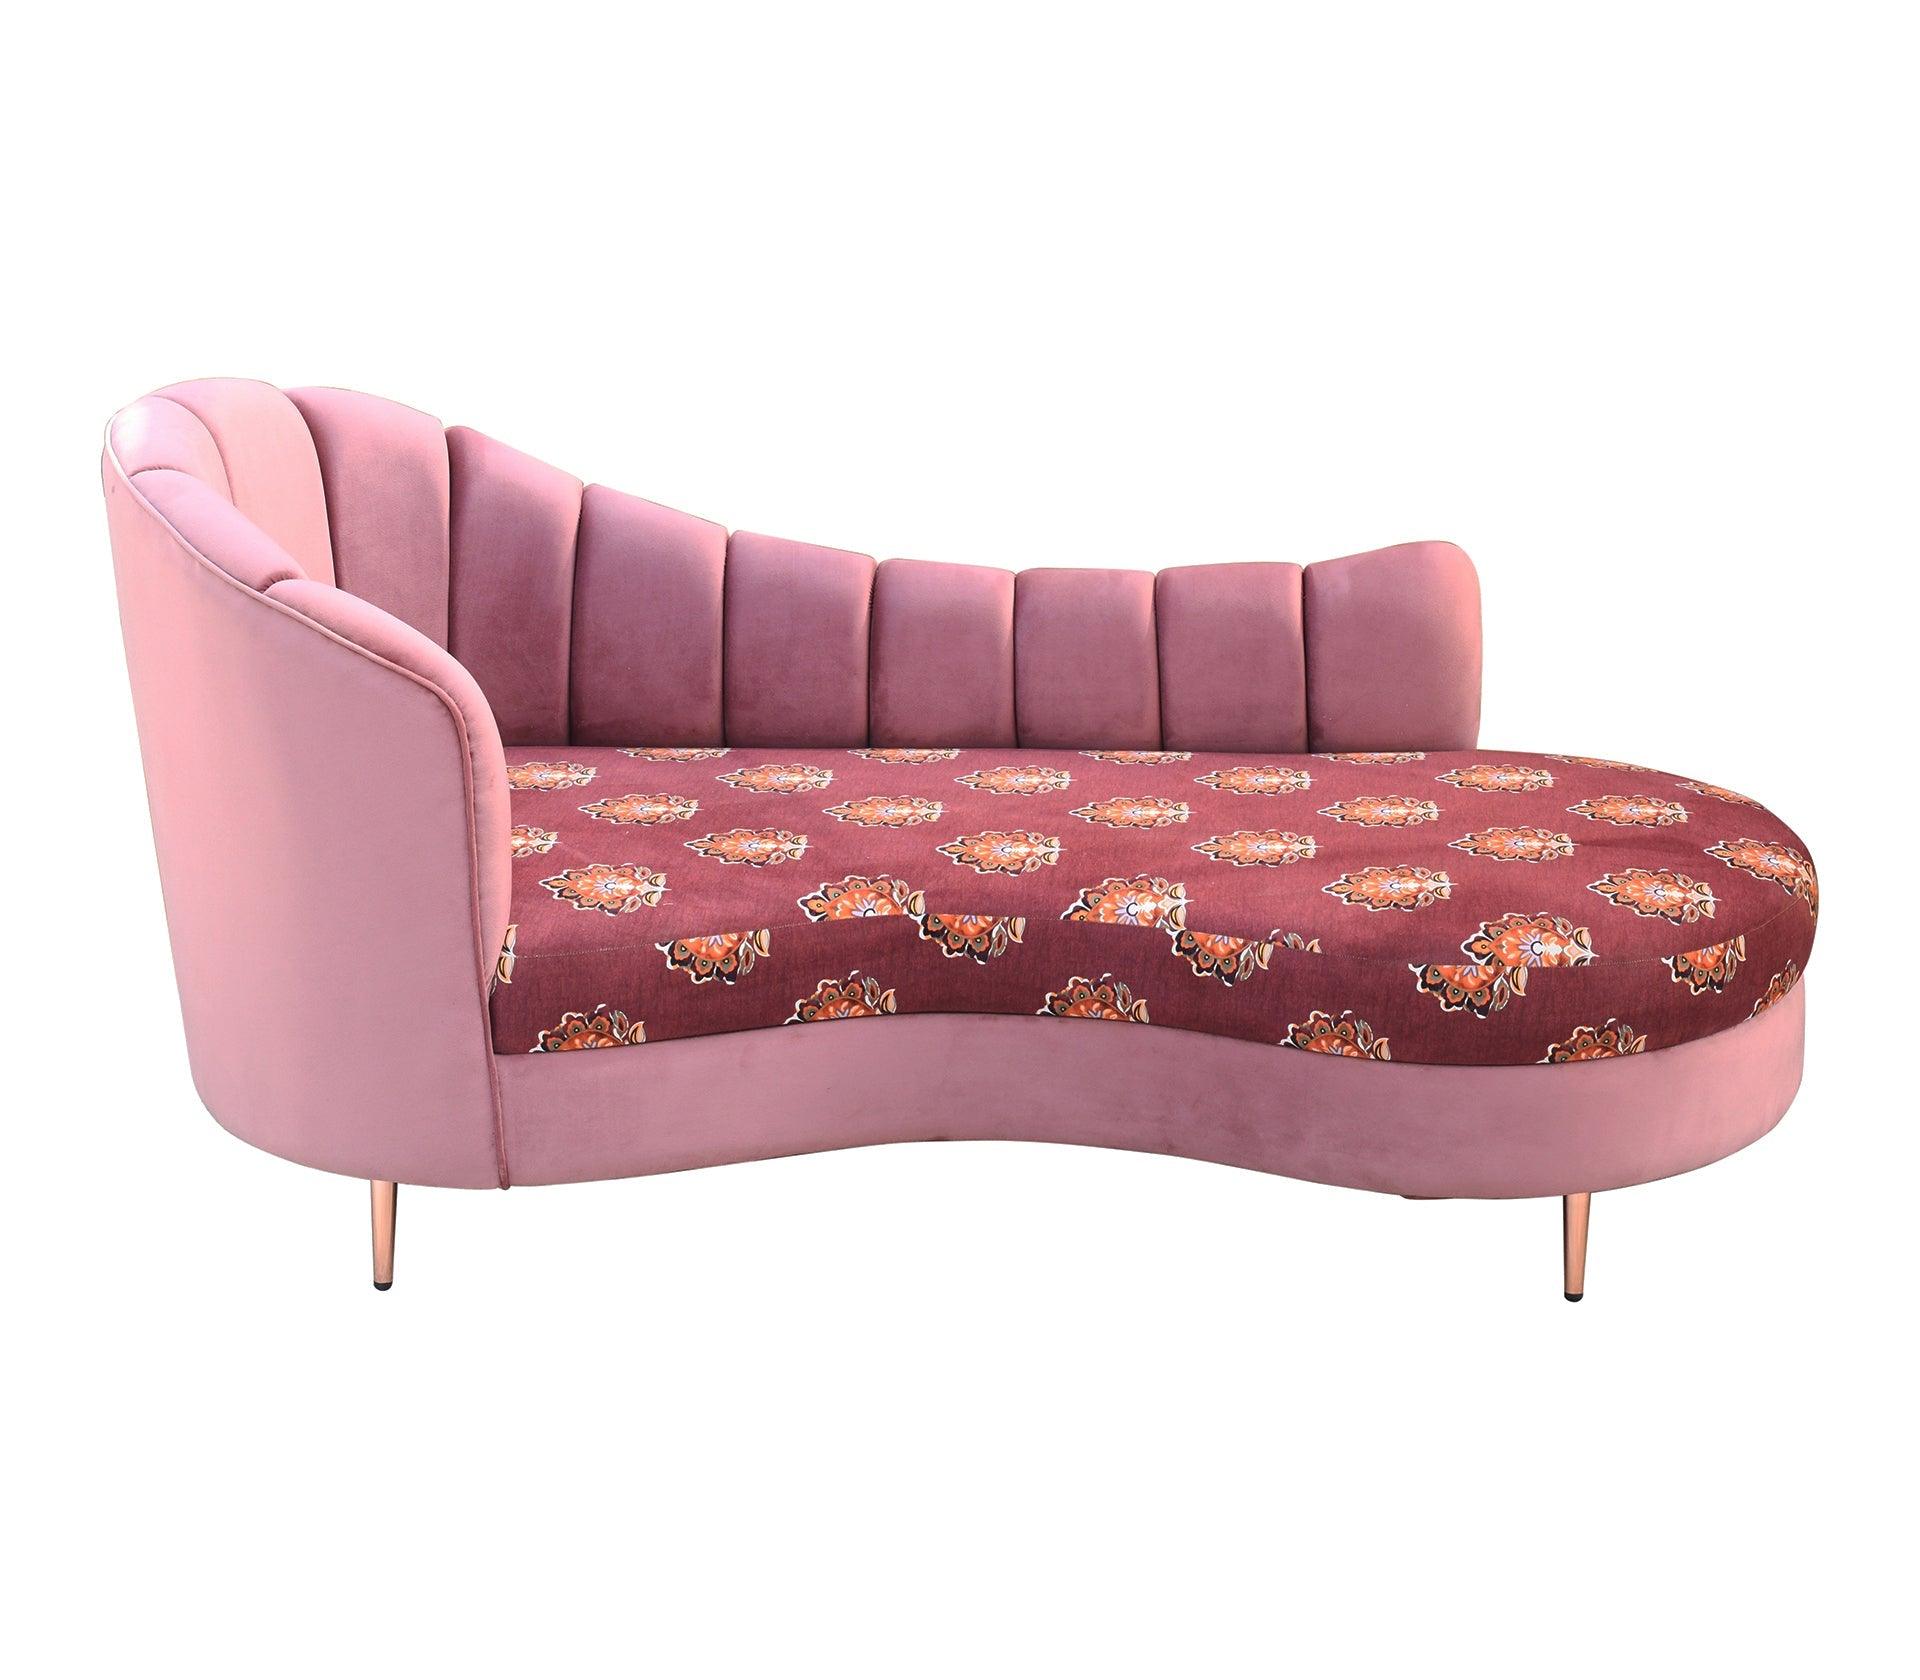 Flowral Sofa Chaise With Golden Legs - Furniture Castle